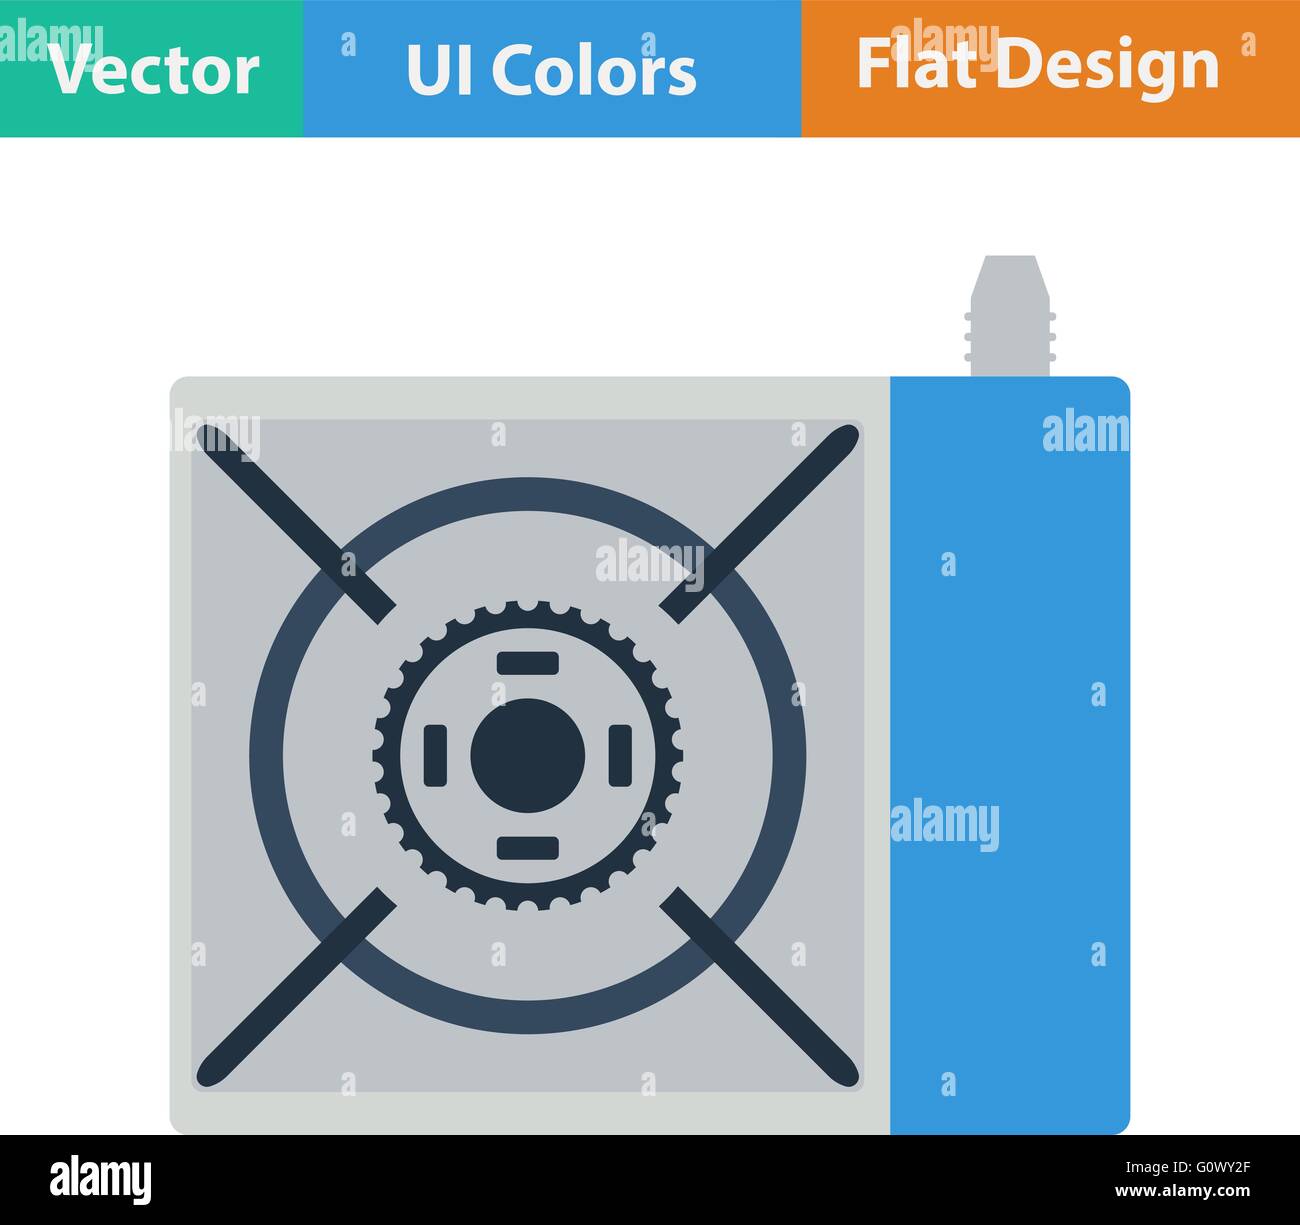 Flat design icon of camping gas burner stove in ui colors. Vector illustration. Stock Vector